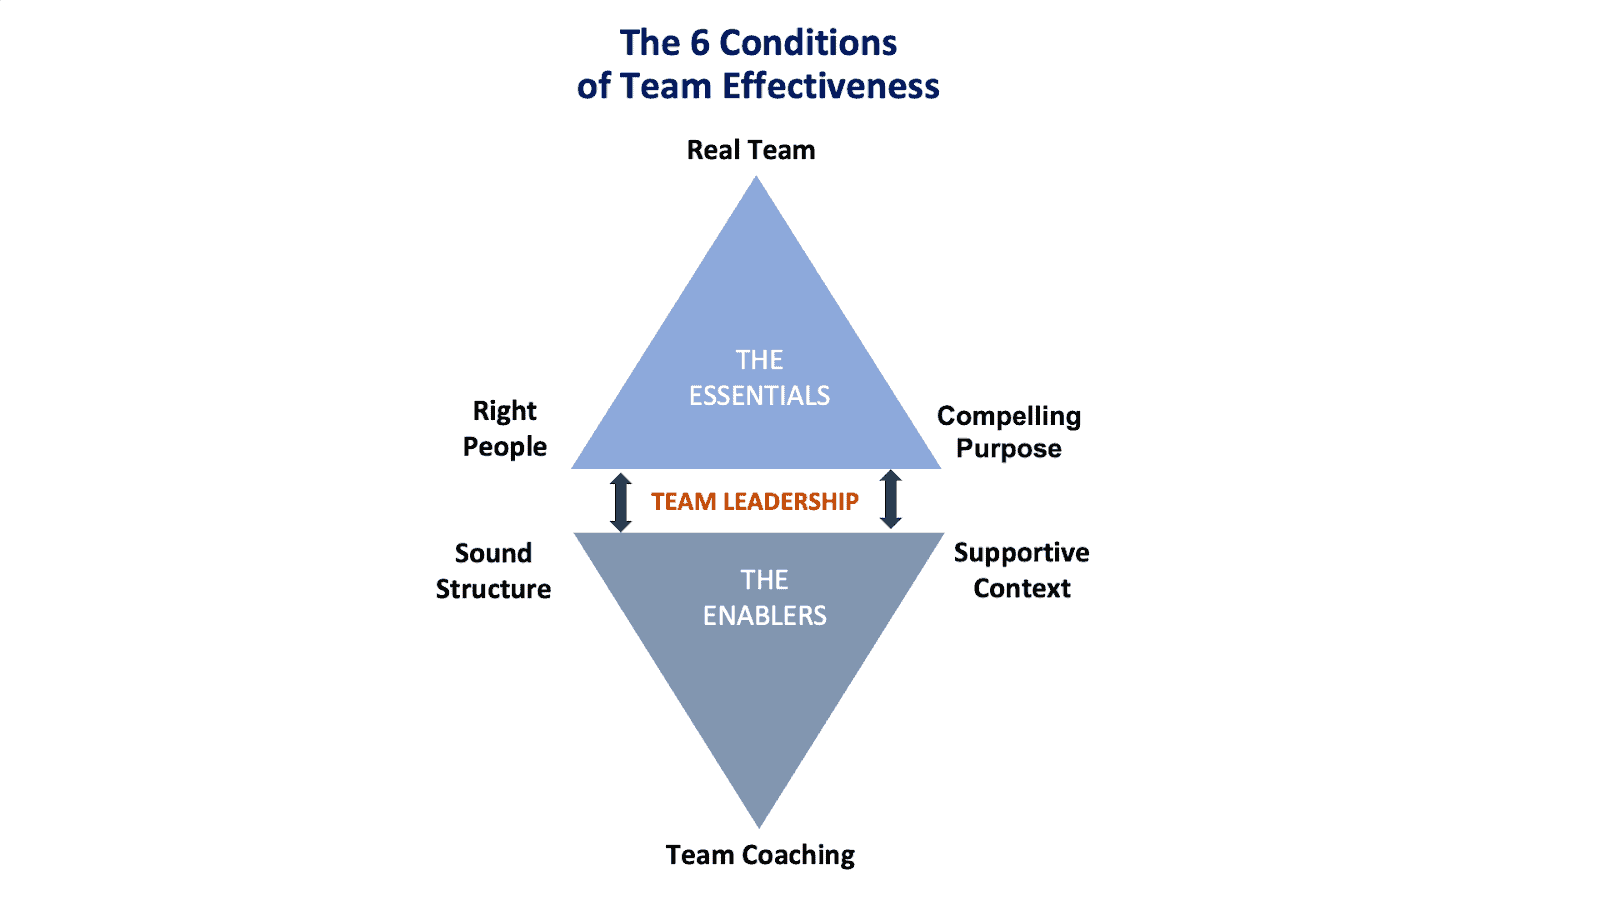 The 6 Conditions of Team Effectiveness